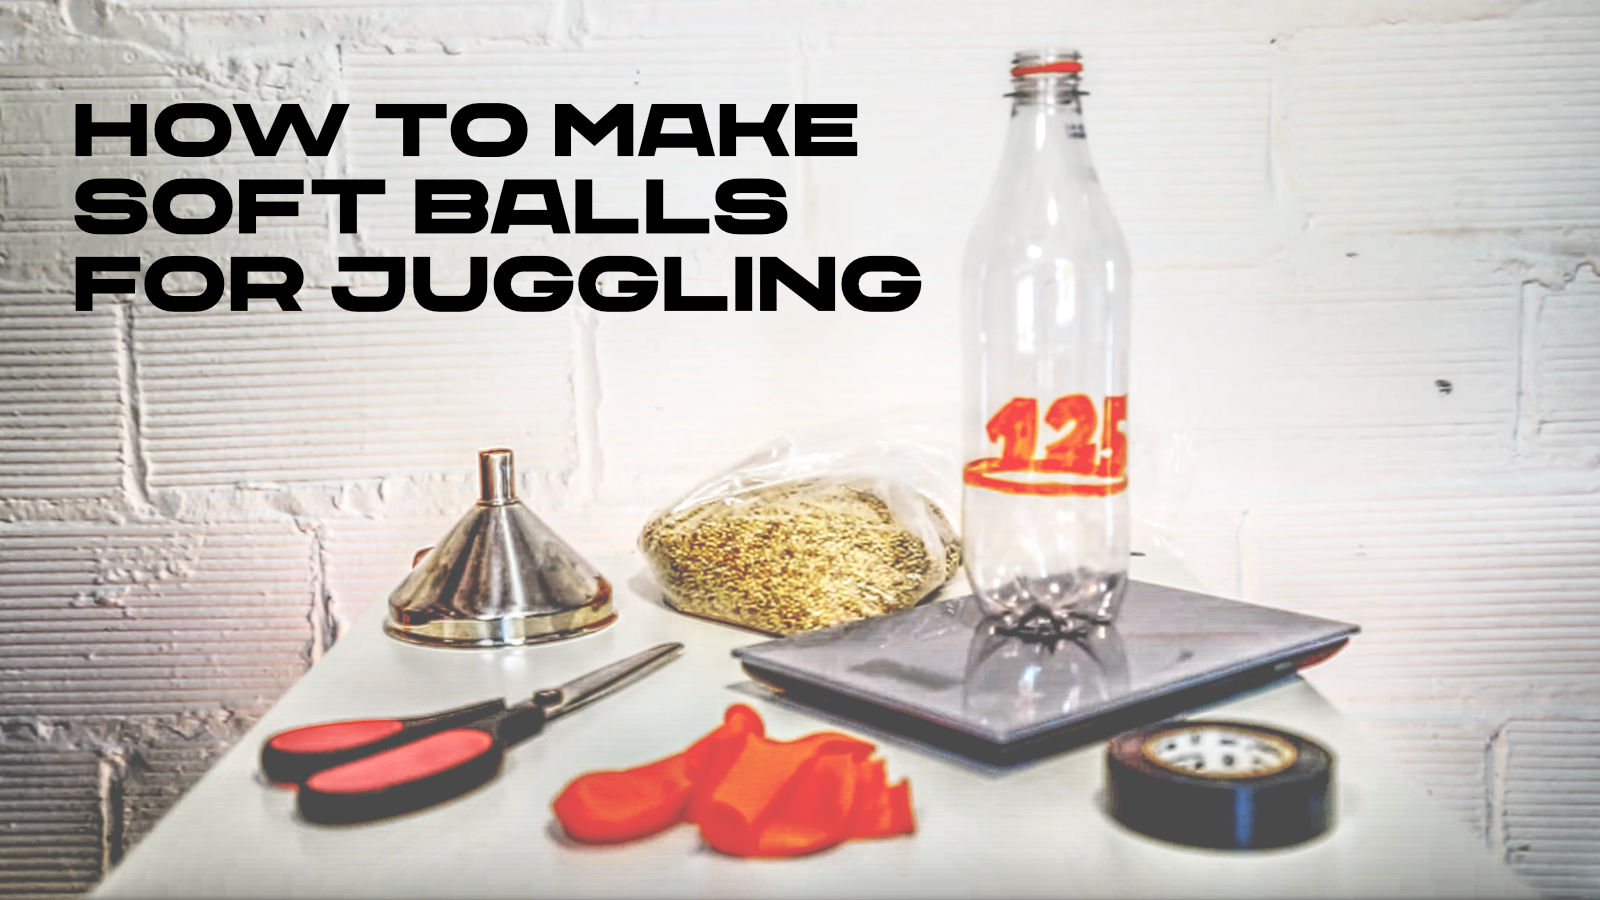 how to make a juggling ball soft blog troposferaxyz by didac gilabert